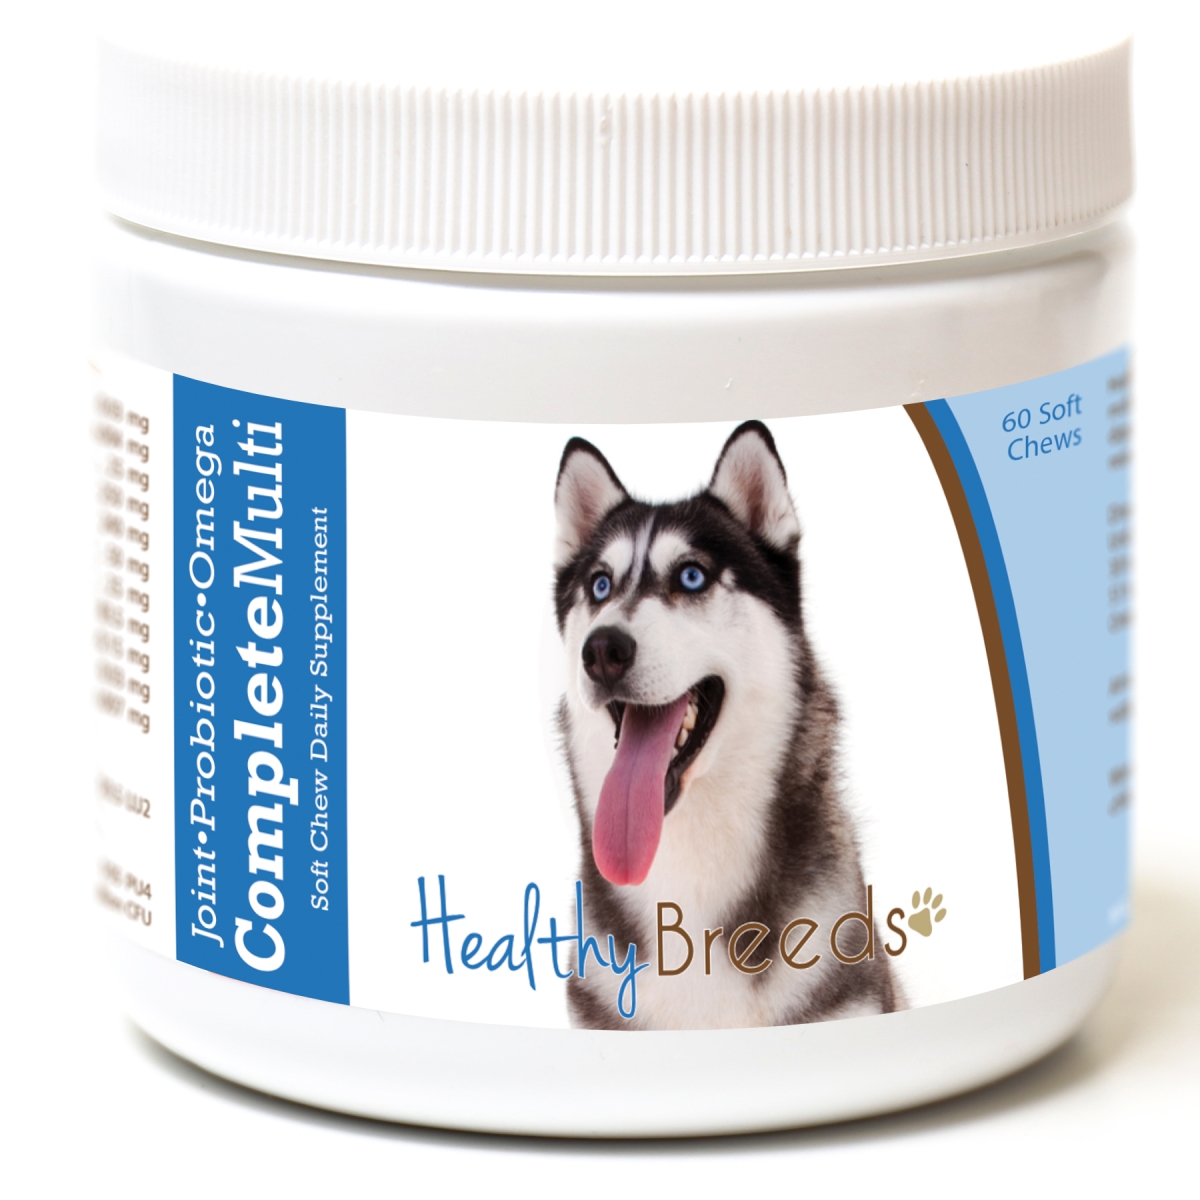 Picture of Healthy Breeds 192959009026 Siberian Husky all in one Multivitamin Soft Chew - 60 Count